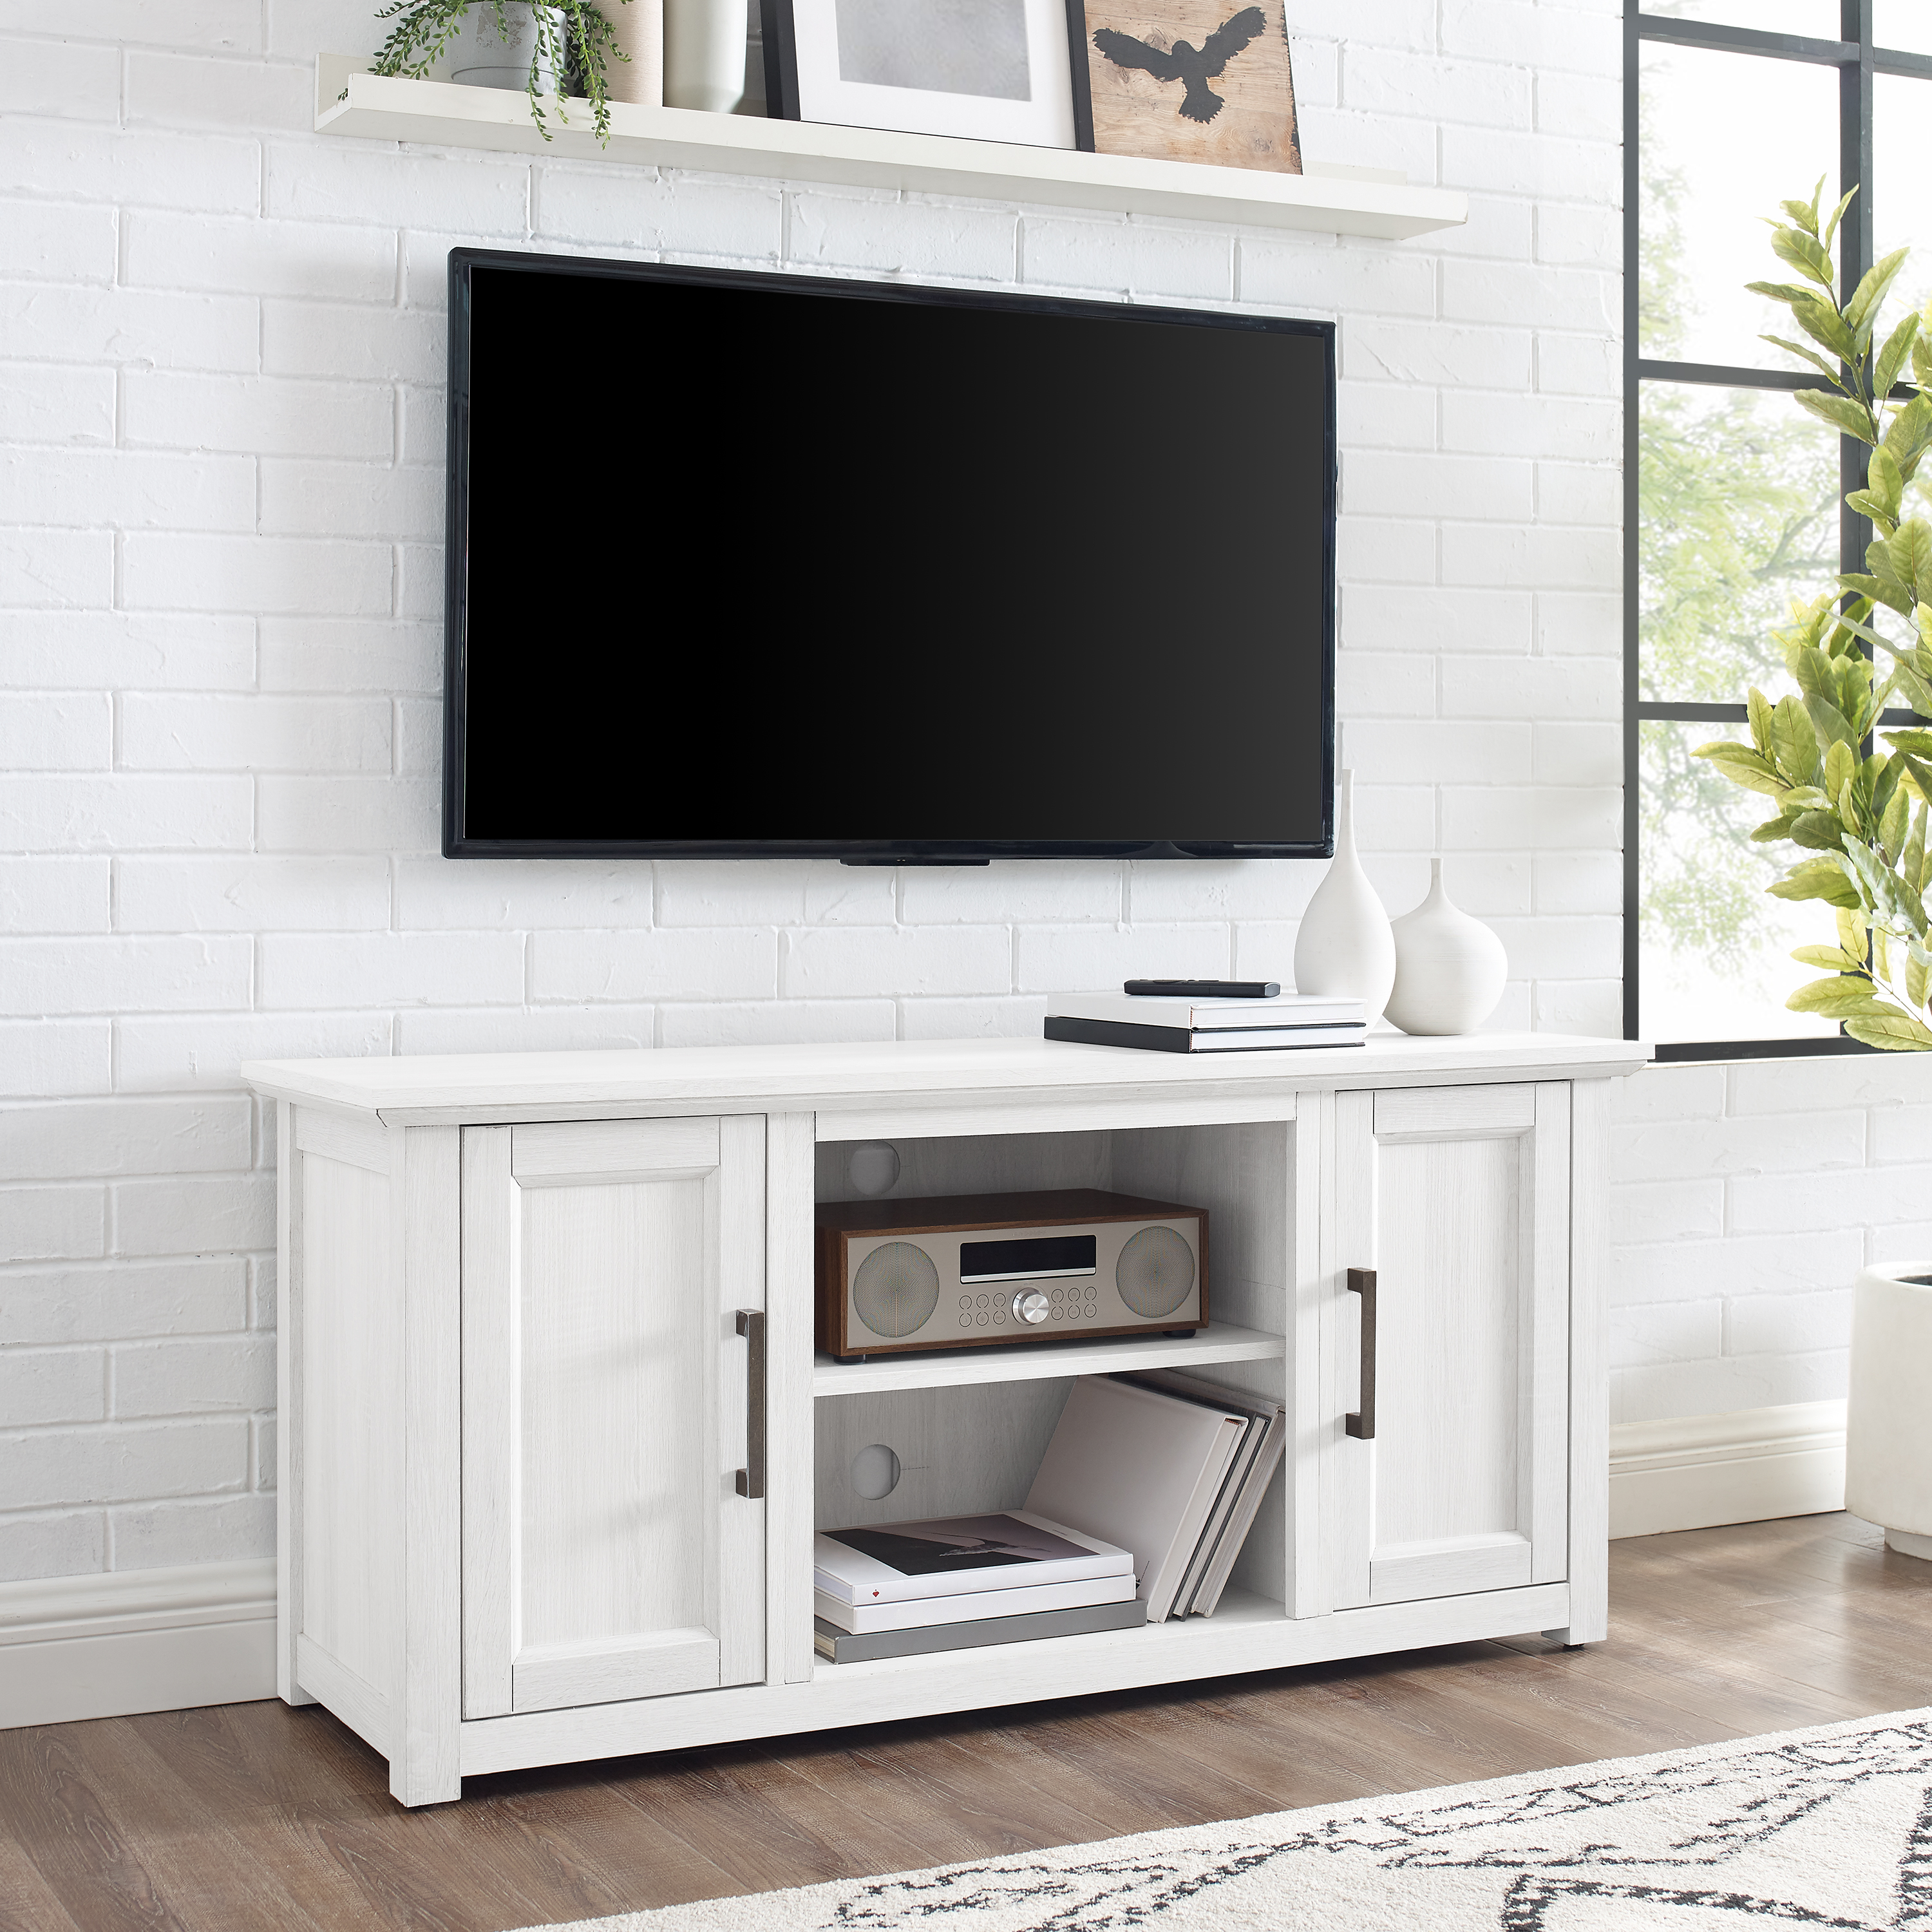 Crosley Camden 48" Rustic Low Profile TV Stand in Whitewash - image 2 of 15